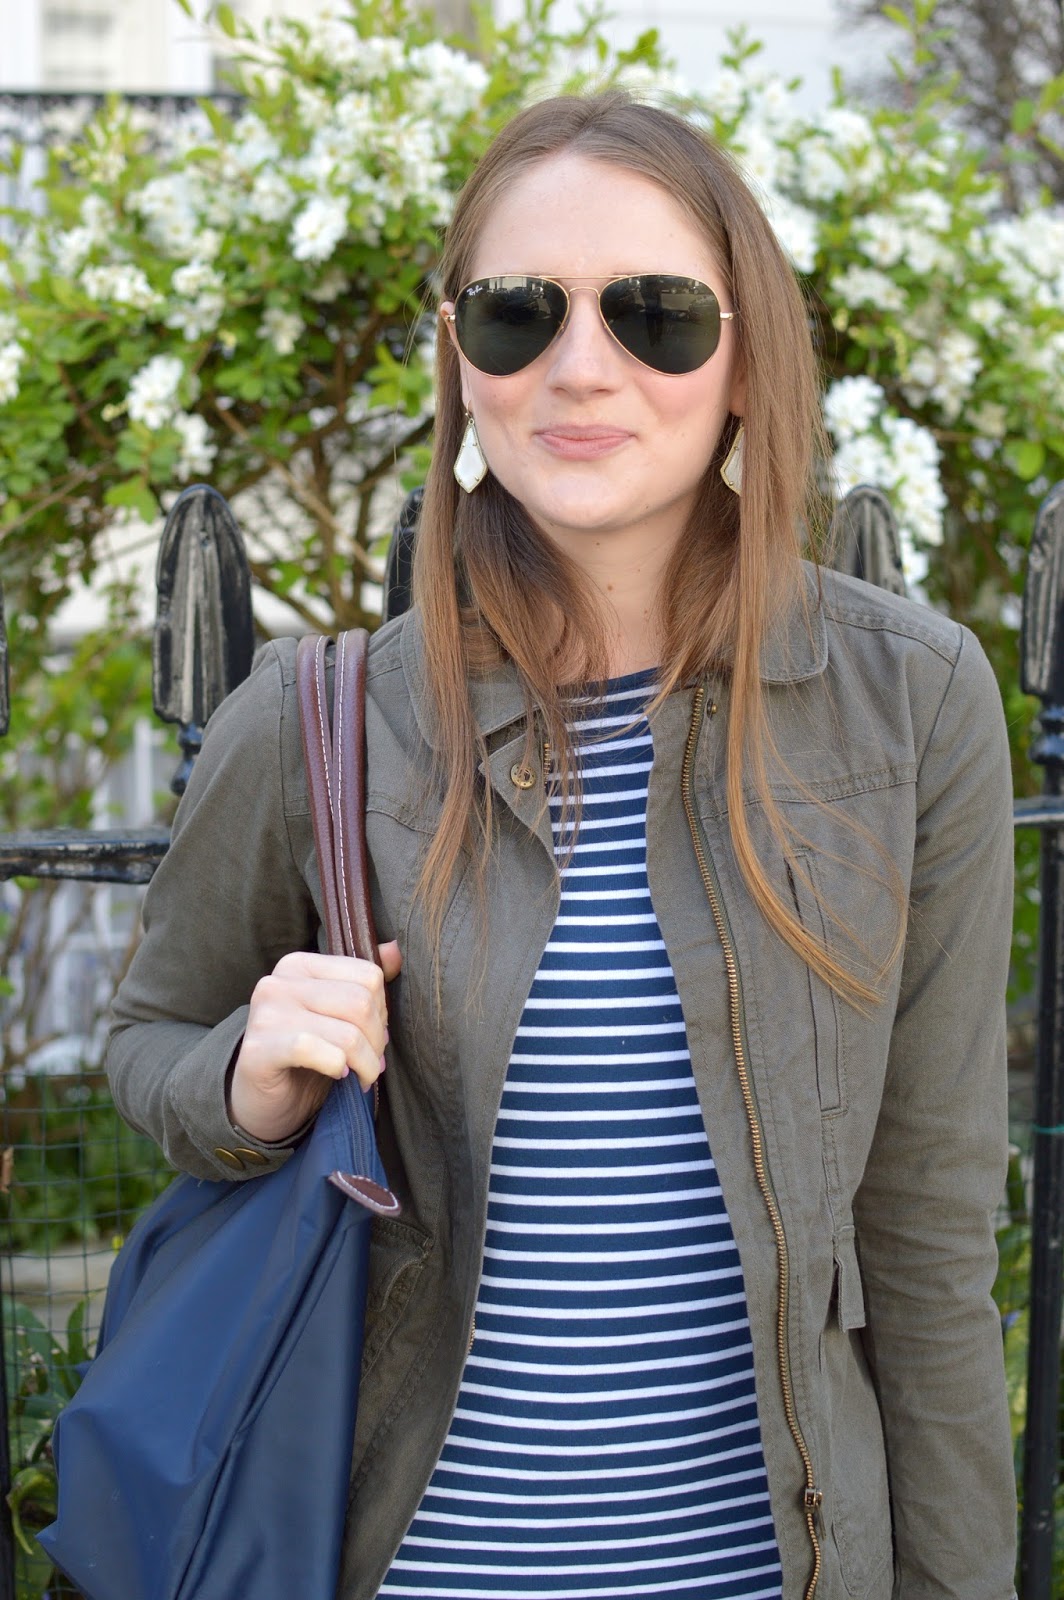 military jacket with a striped t-shirt dress | casual spring outfit ideas | what to wear this spring | spring outfits | what to wear with a military jacket | outfits with stripes | 